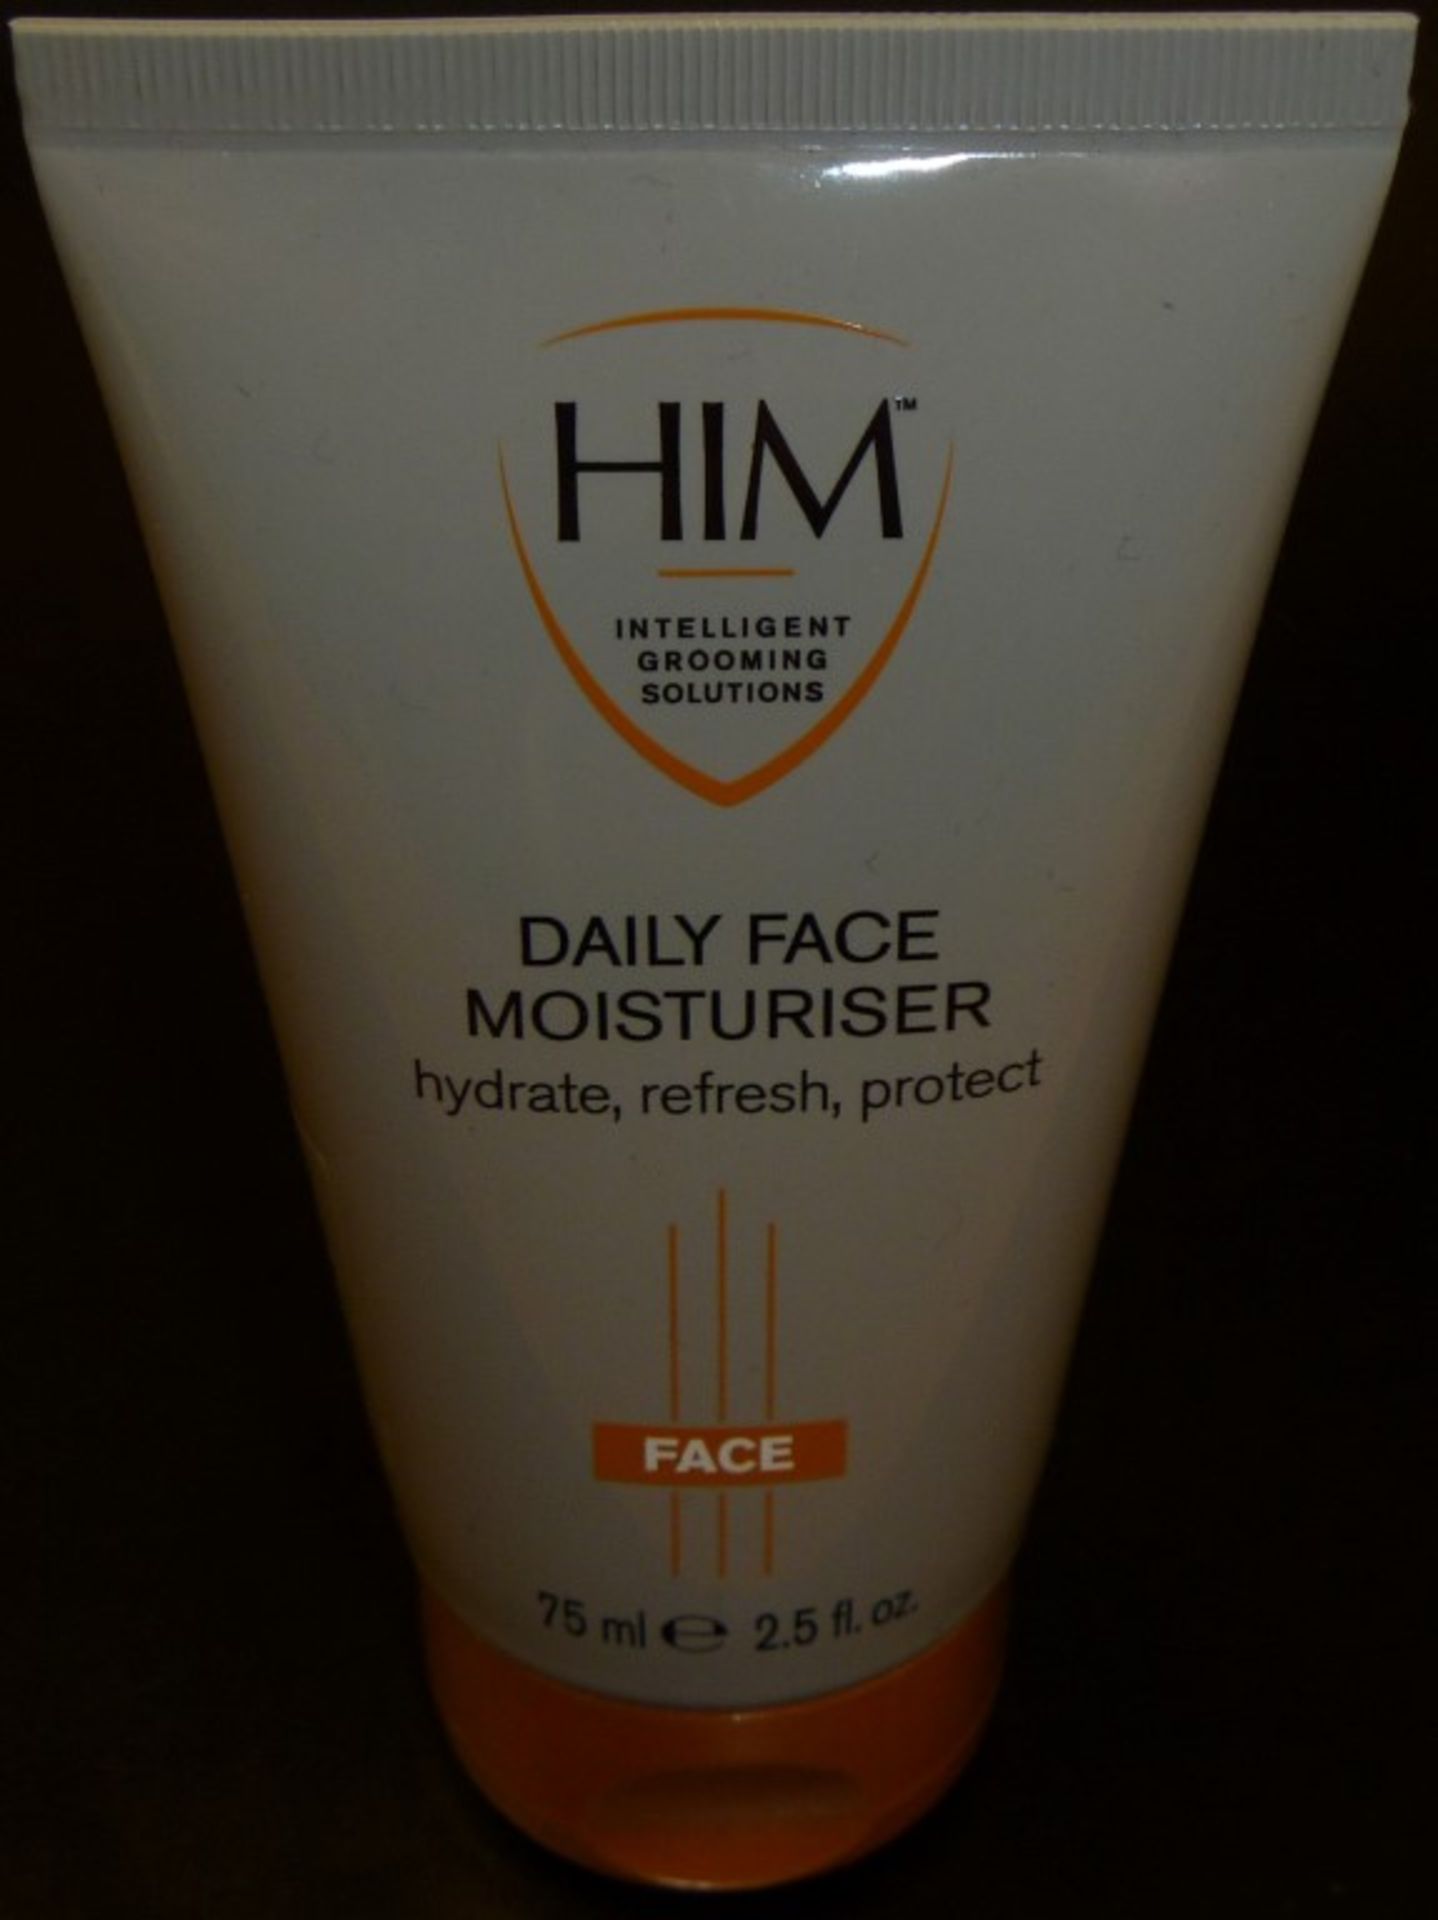 20 x HIM Intelligent Grooming Solutions - 75ml DAILY FACE MOISTURISER - Brand New Stock - Hydrate, - Image 2 of 3